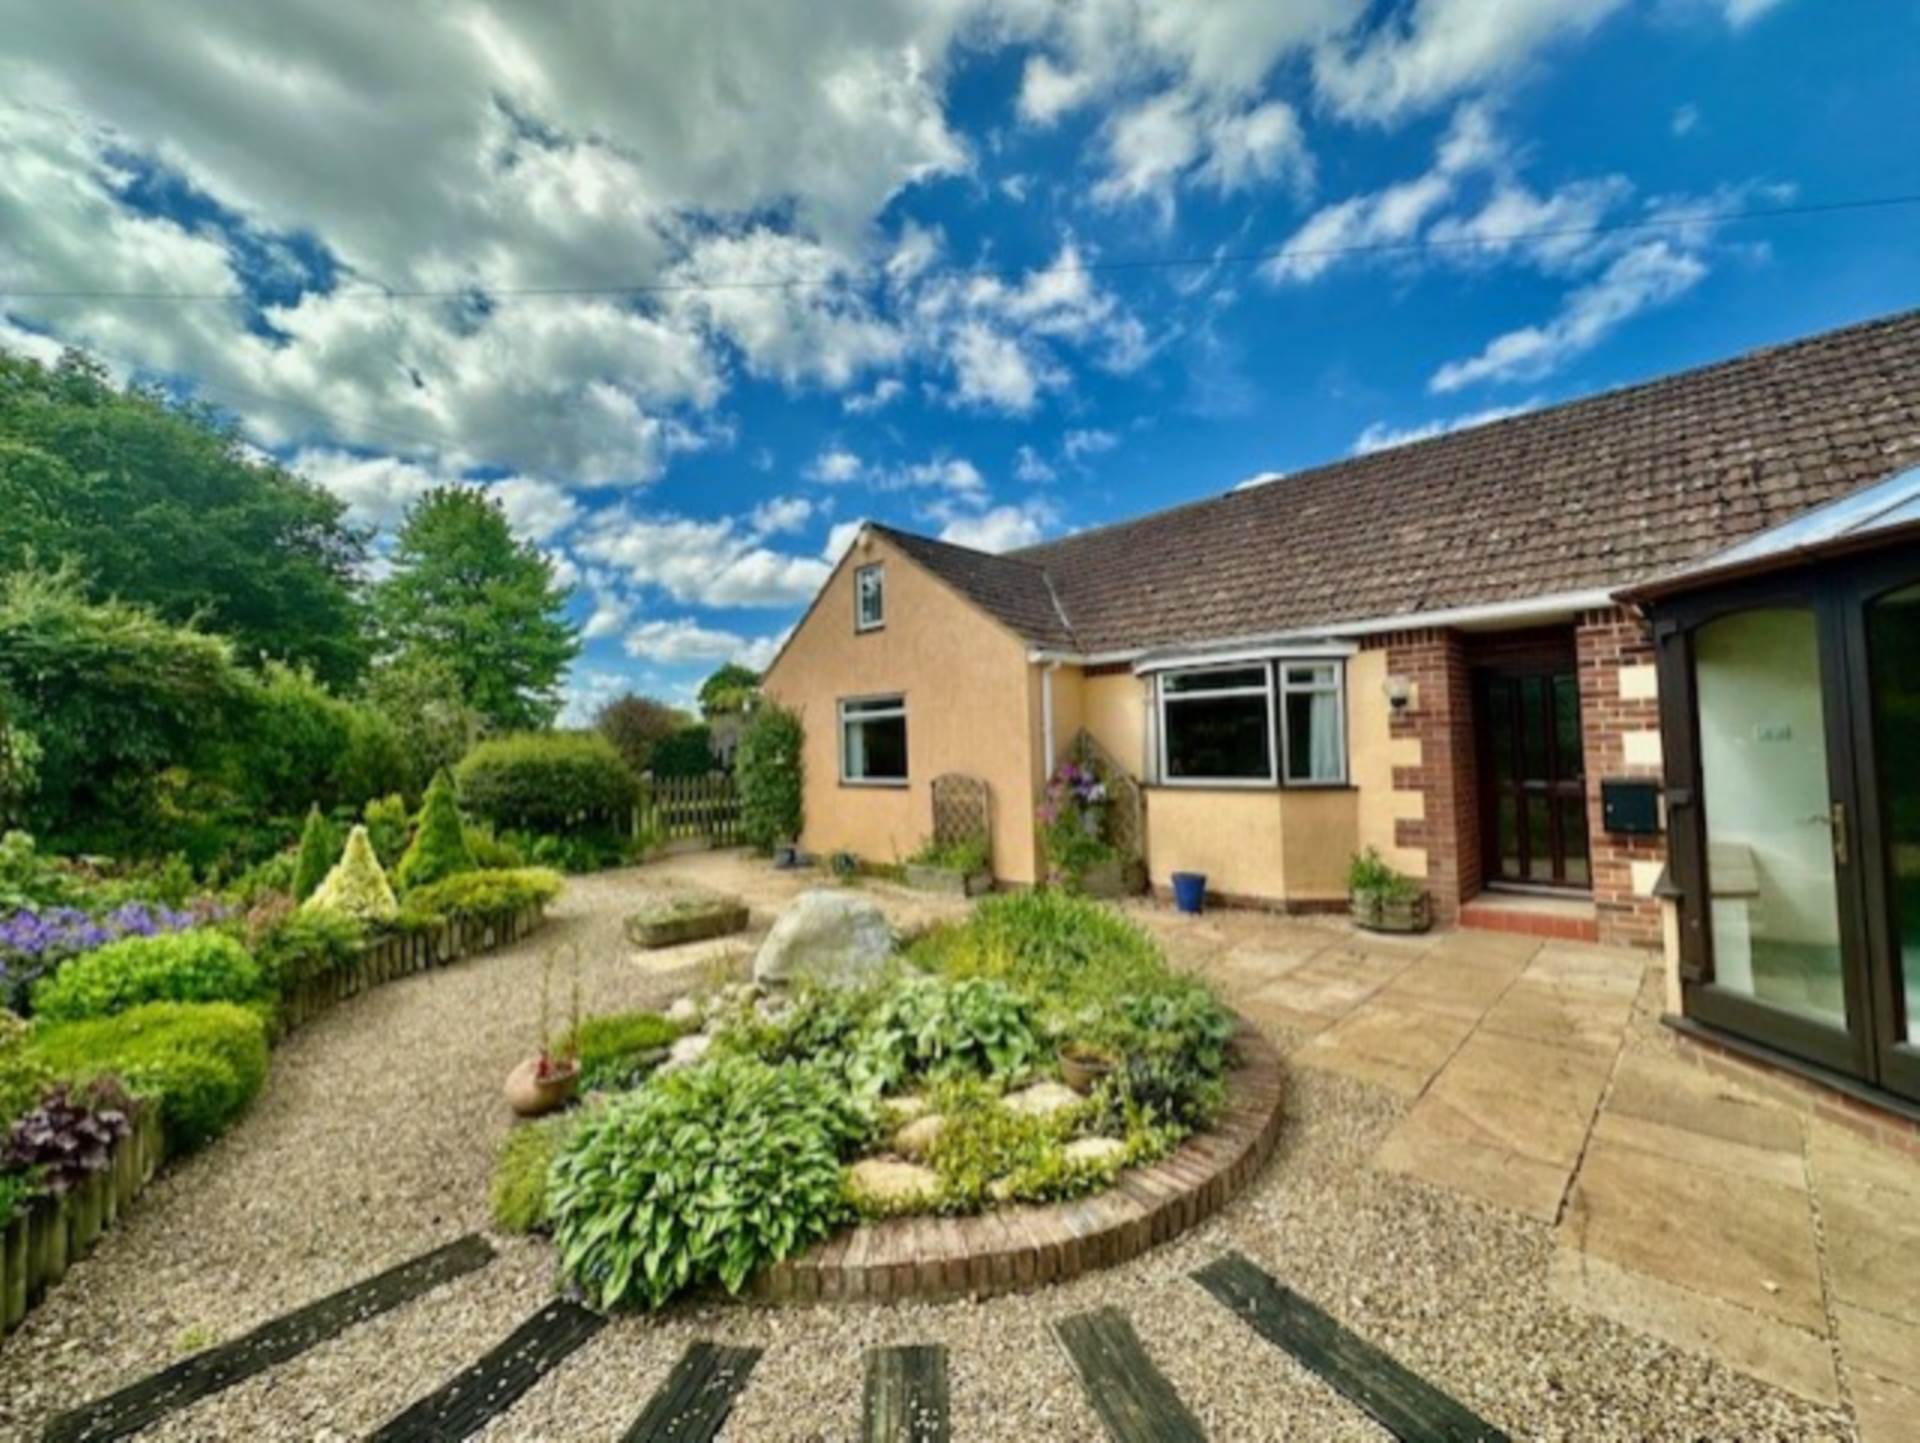 4 bed Bungalow for rent in Bath. From Swallows Property Letting - Frome